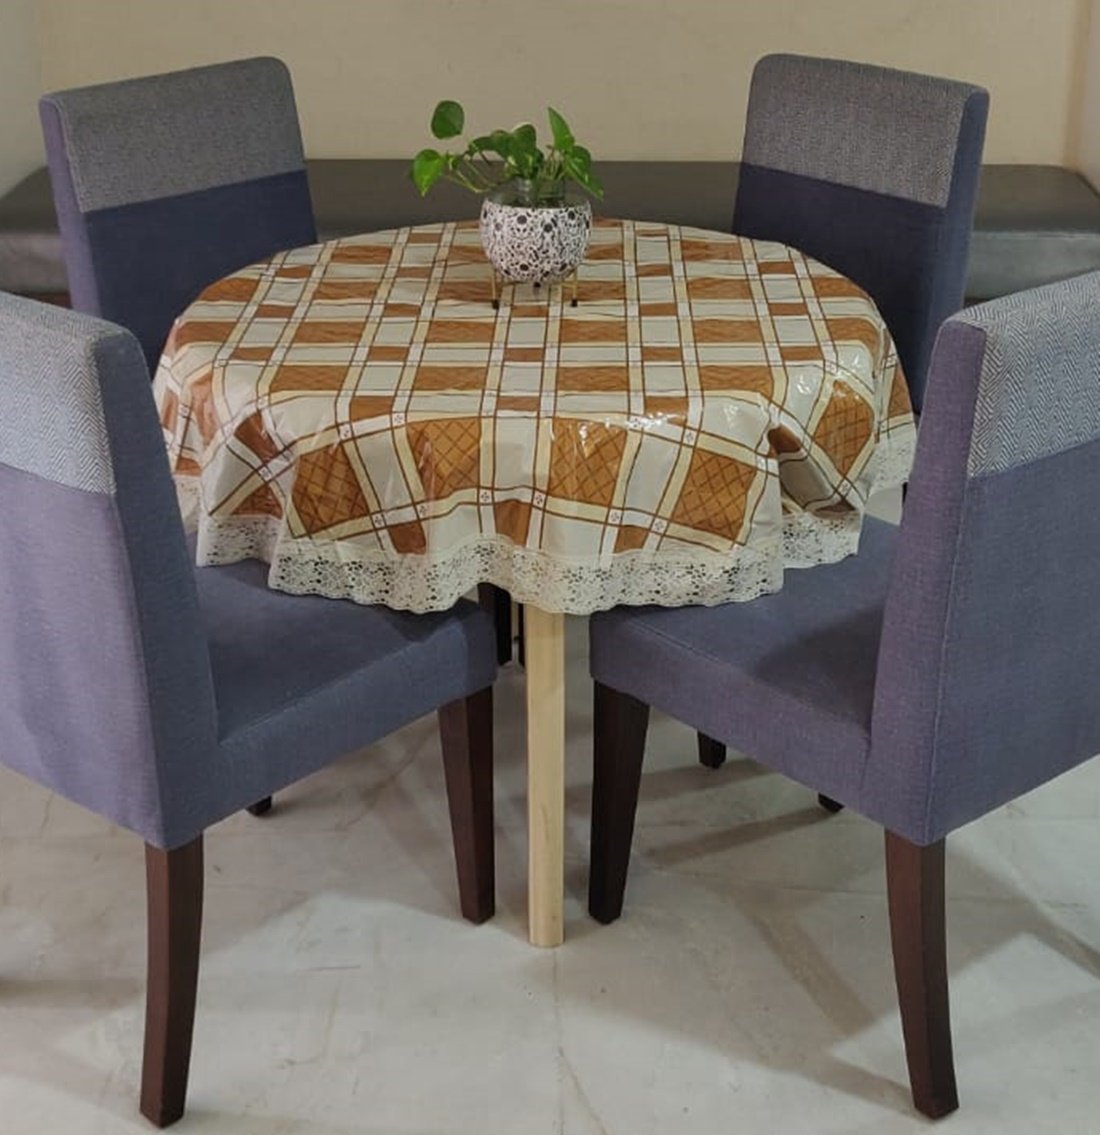 Griiham PVC 4 Seater Printed Round Table Cover (Size - 60 inches) Design - Multi Checks VK08